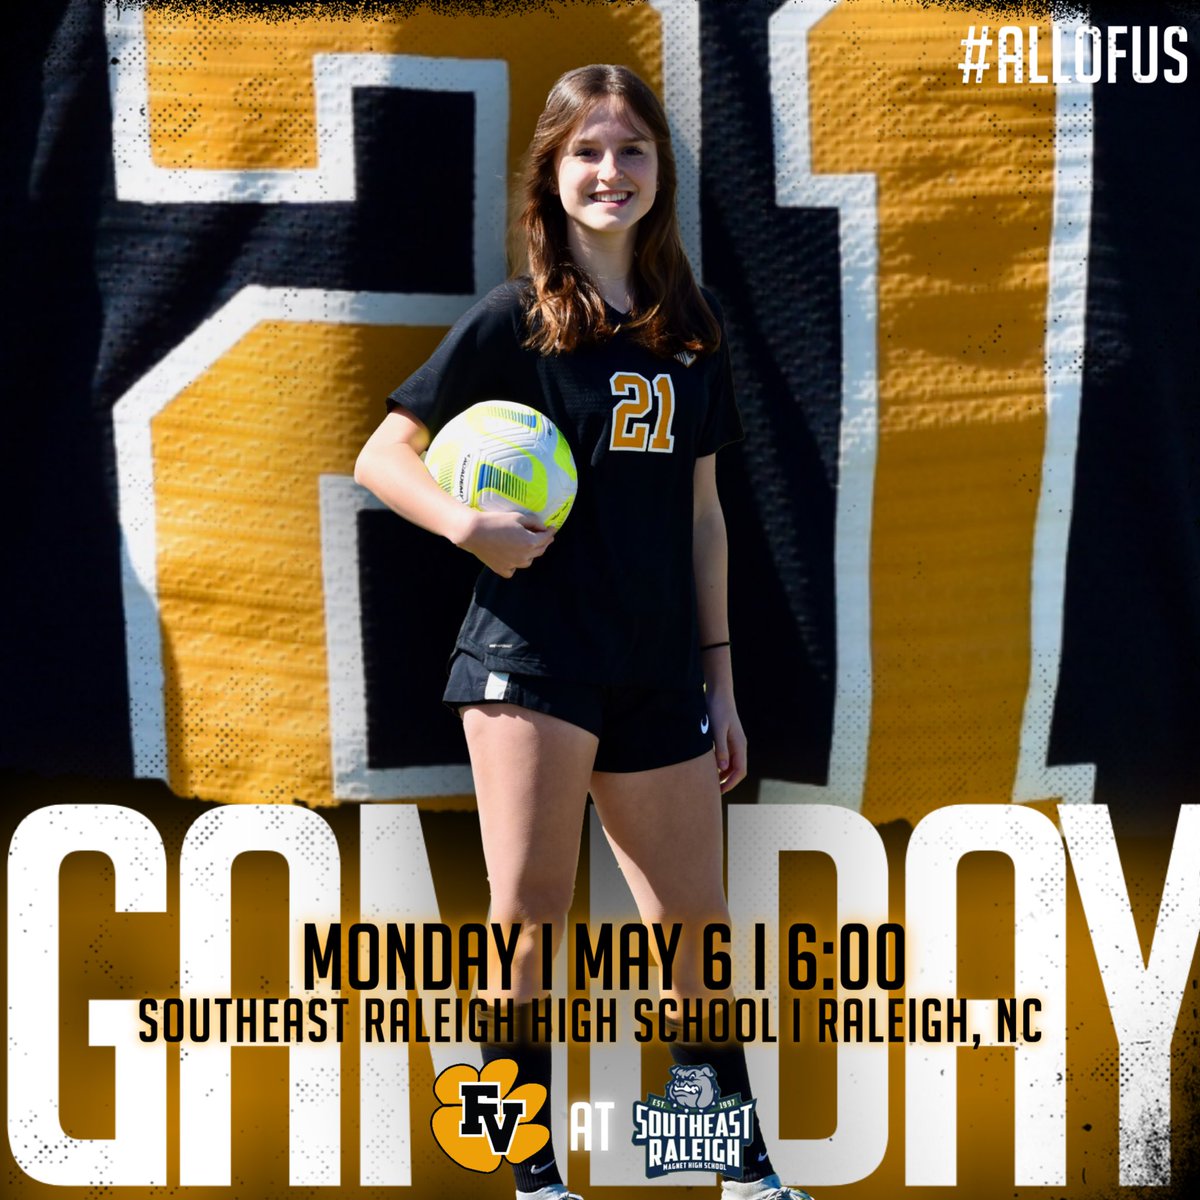 Heading to Raleigh for the first of two road trips this week. 

🆚 Southeast Raleigh 
📆 May 6
⌚️ 6:00 (Varsity Only)
🏟️ Southeast Raleigh High School
📍 Raleigh, NC
🎟️ gofan.co
💻 nfhsnetwork.com

#allofus 🐯⚽️✍️